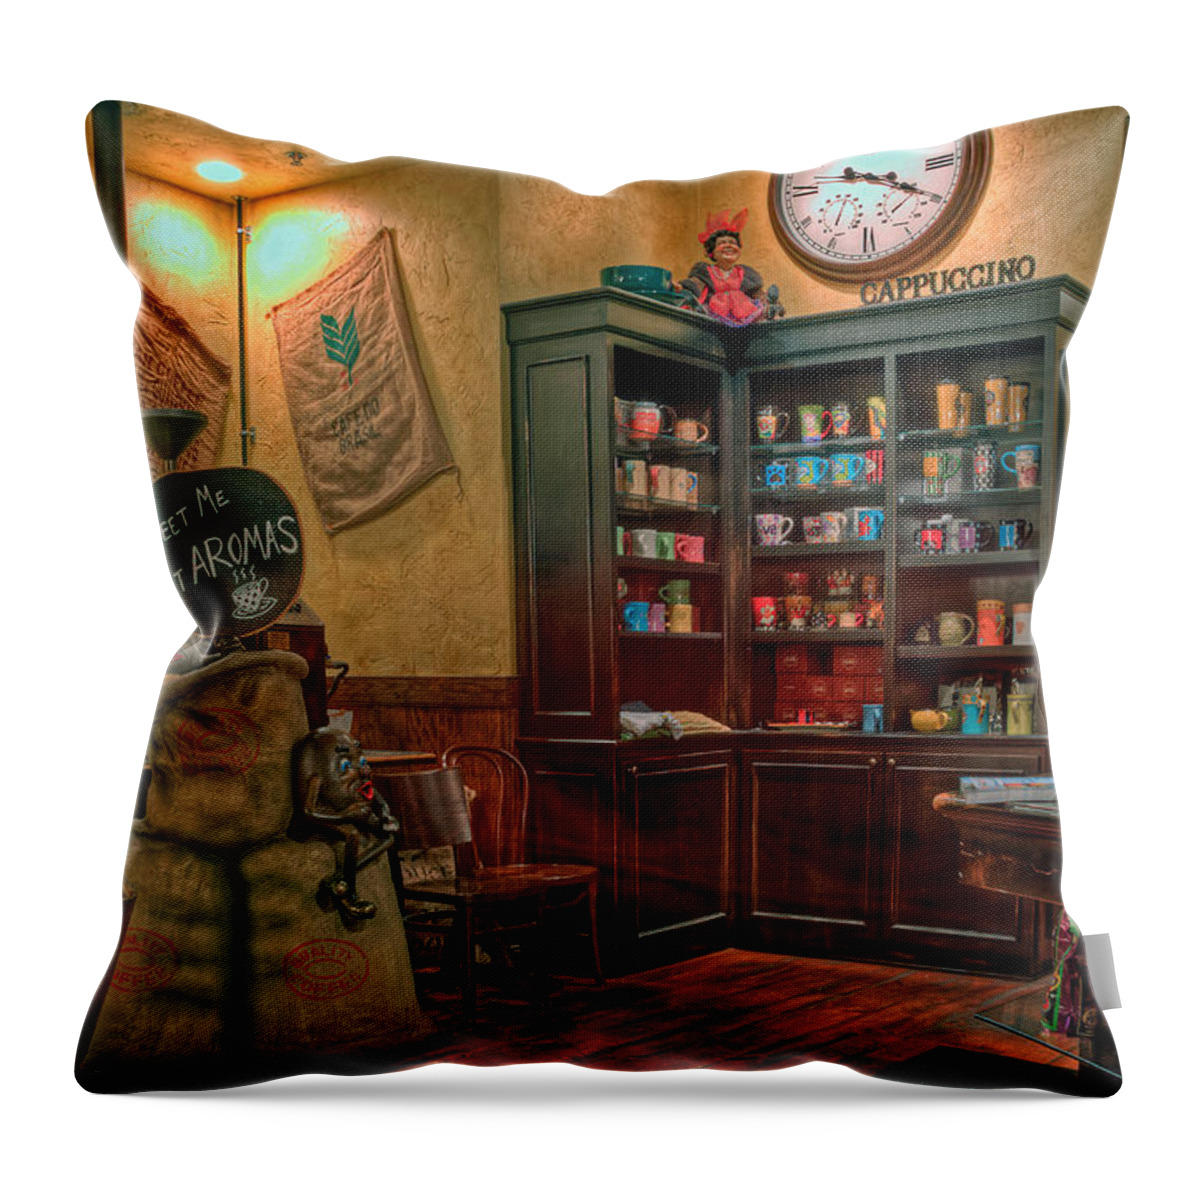 Aromas Throw Pillow featuring the photograph Aromas Coffee Shop by Jerry Gammon